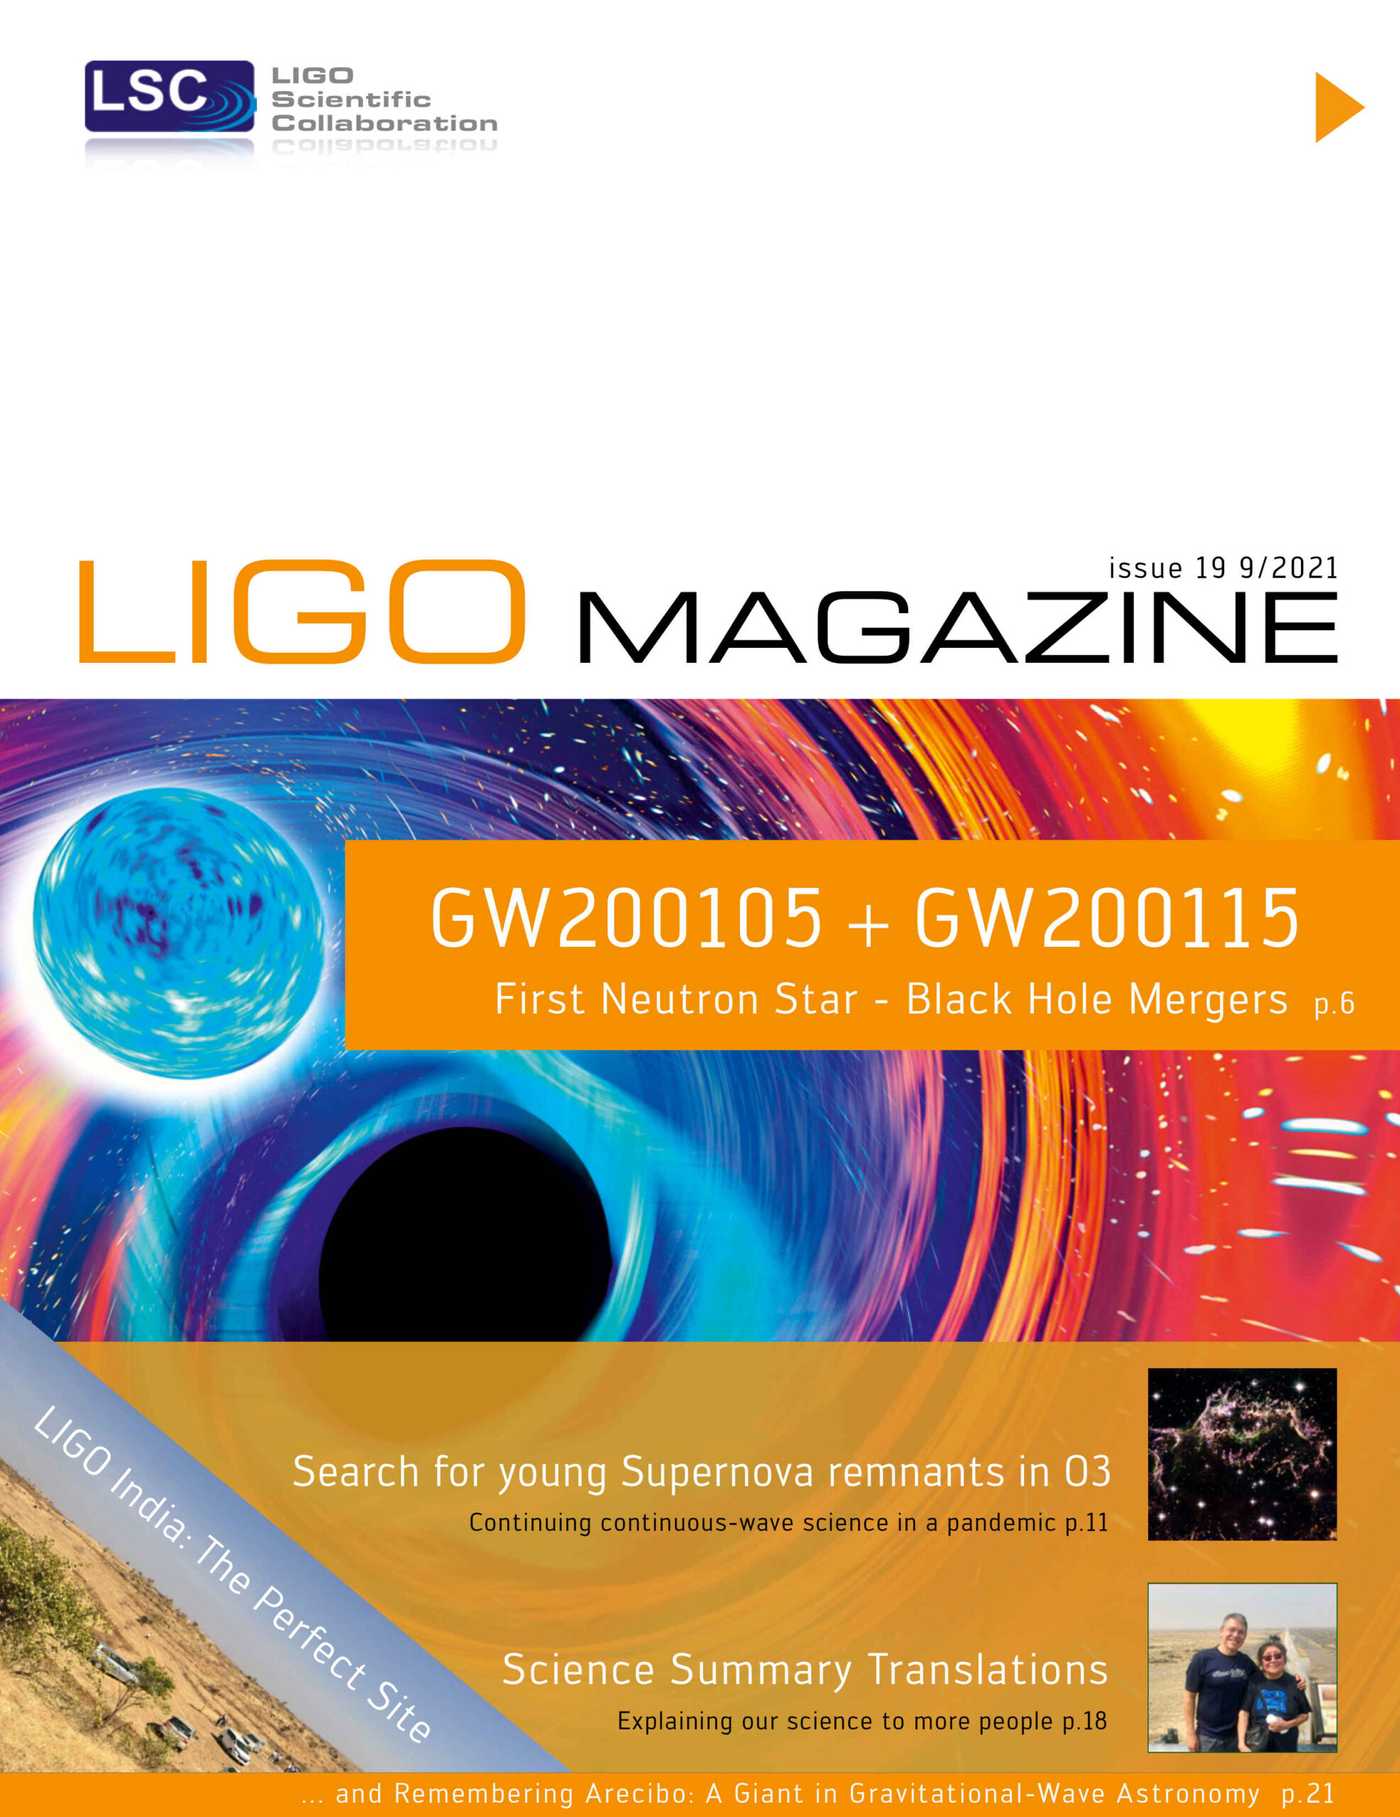 News-Image 23 of: New LIGO Magazine Issue 19 is out